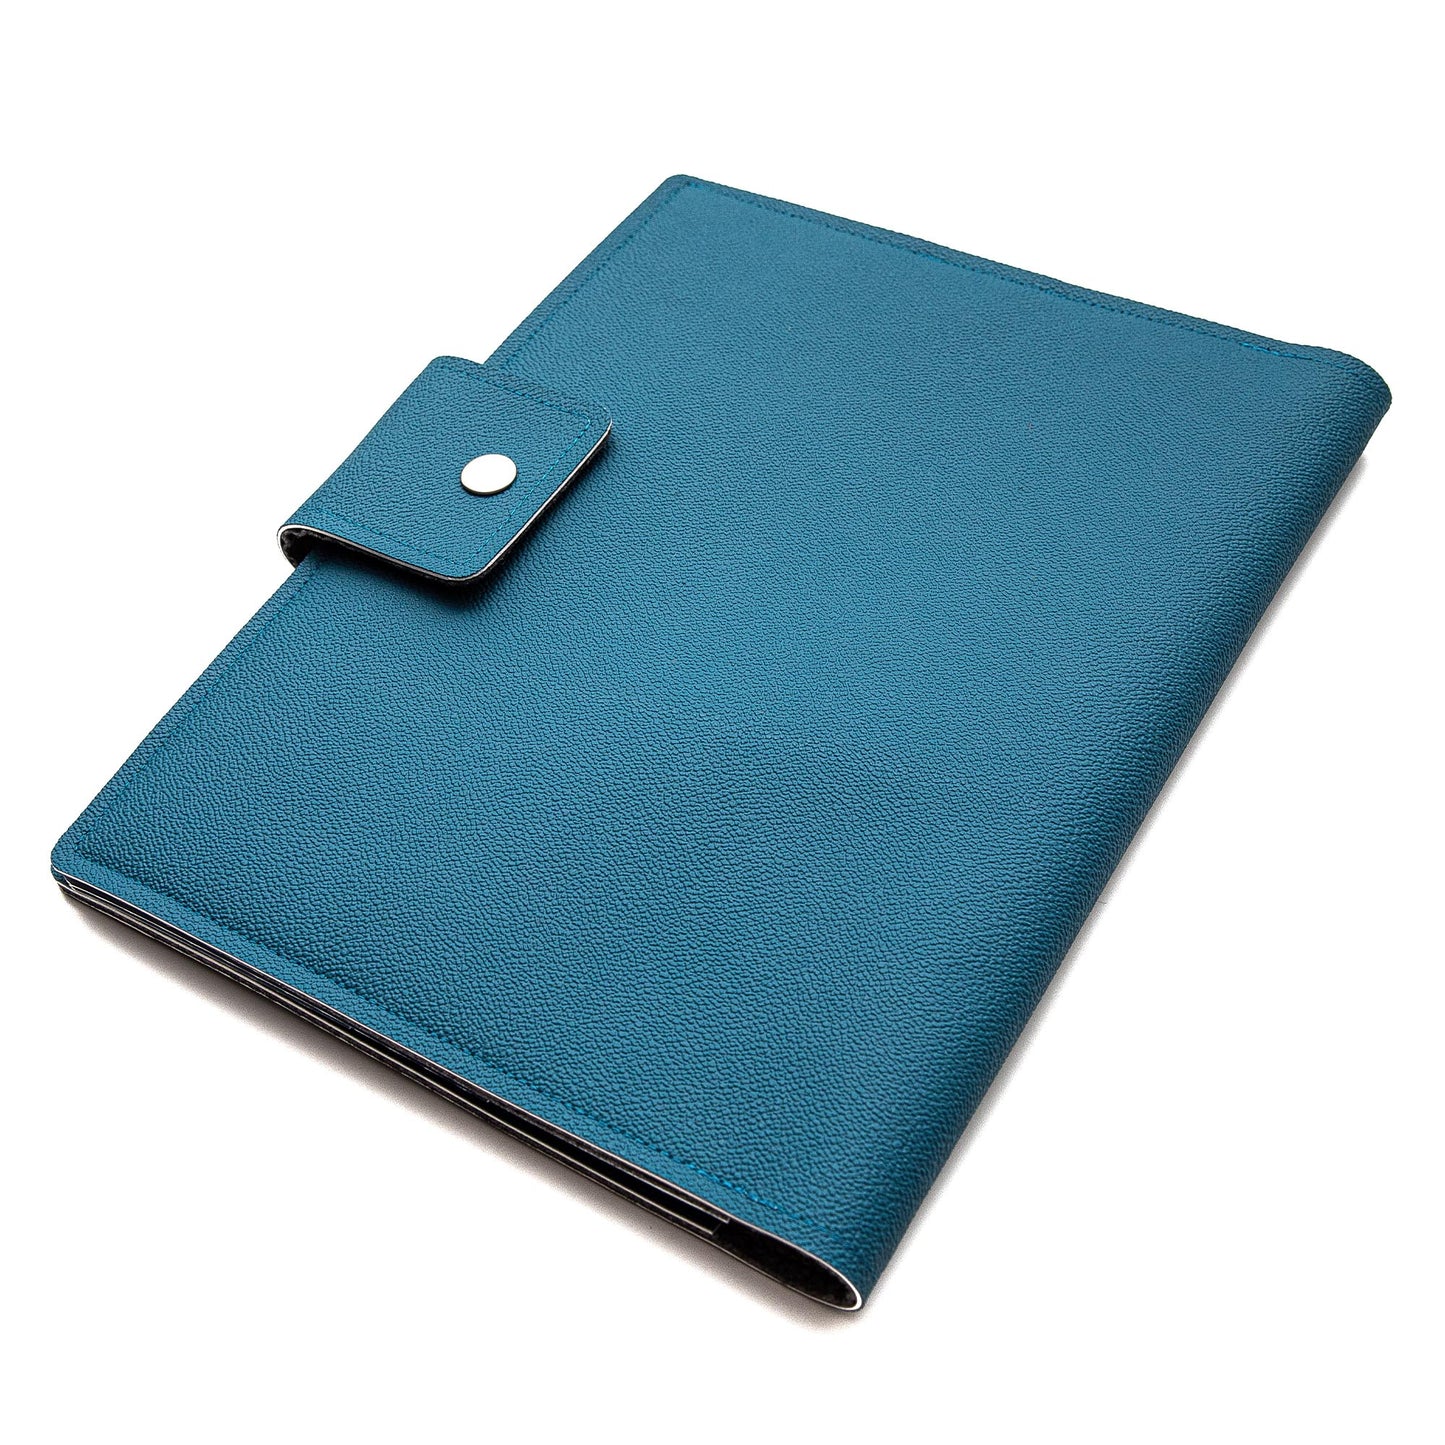 Handmade Folio Cover for iPad/Pro/Air - Yale Blue Faux Leather